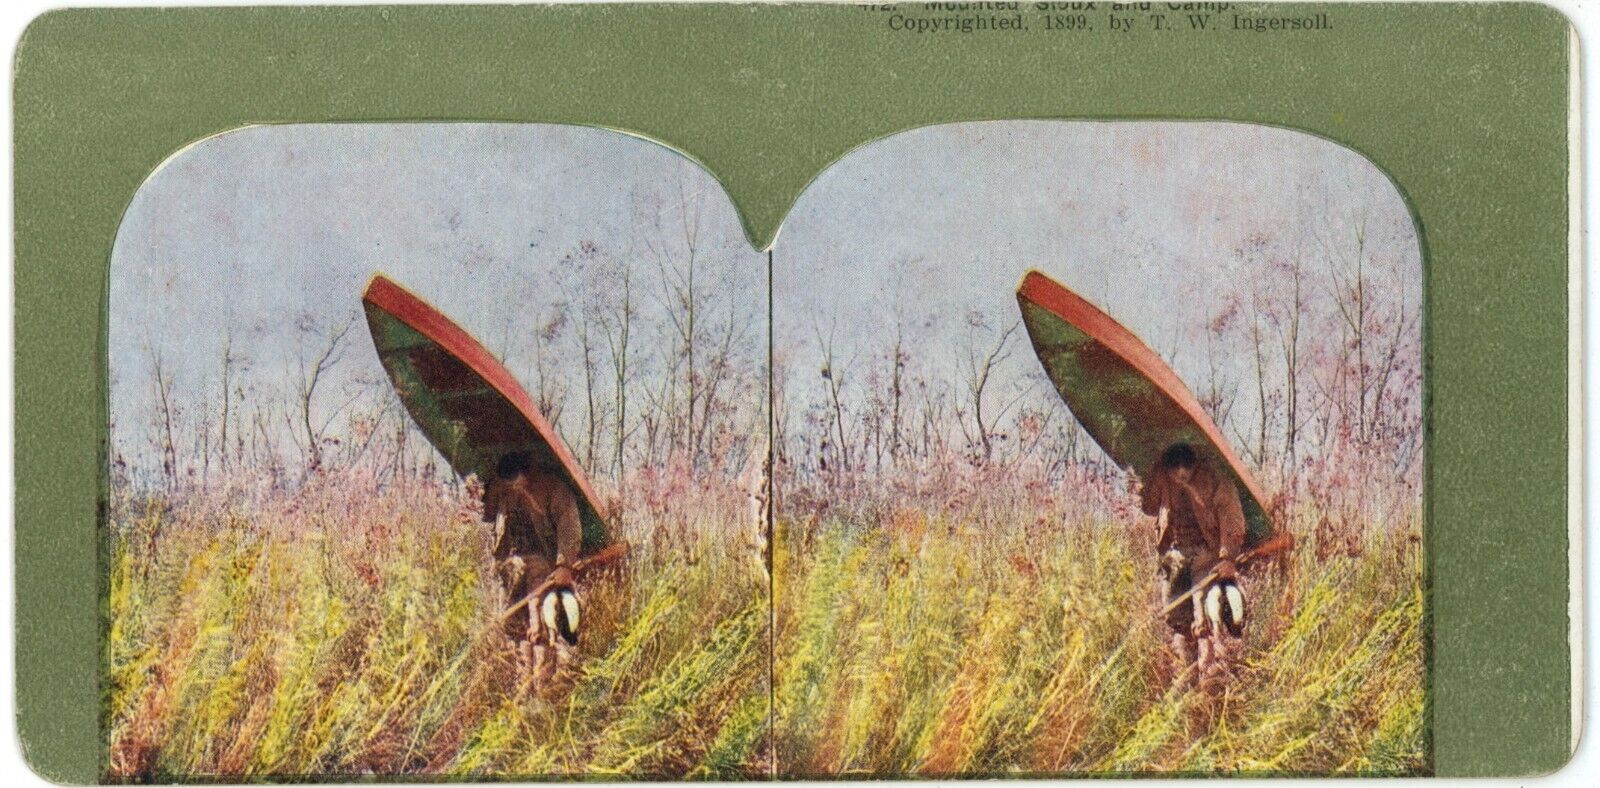 c1900's Printing Error Colorized Stereoview Hunting for Ducks. Hunter With Canoe